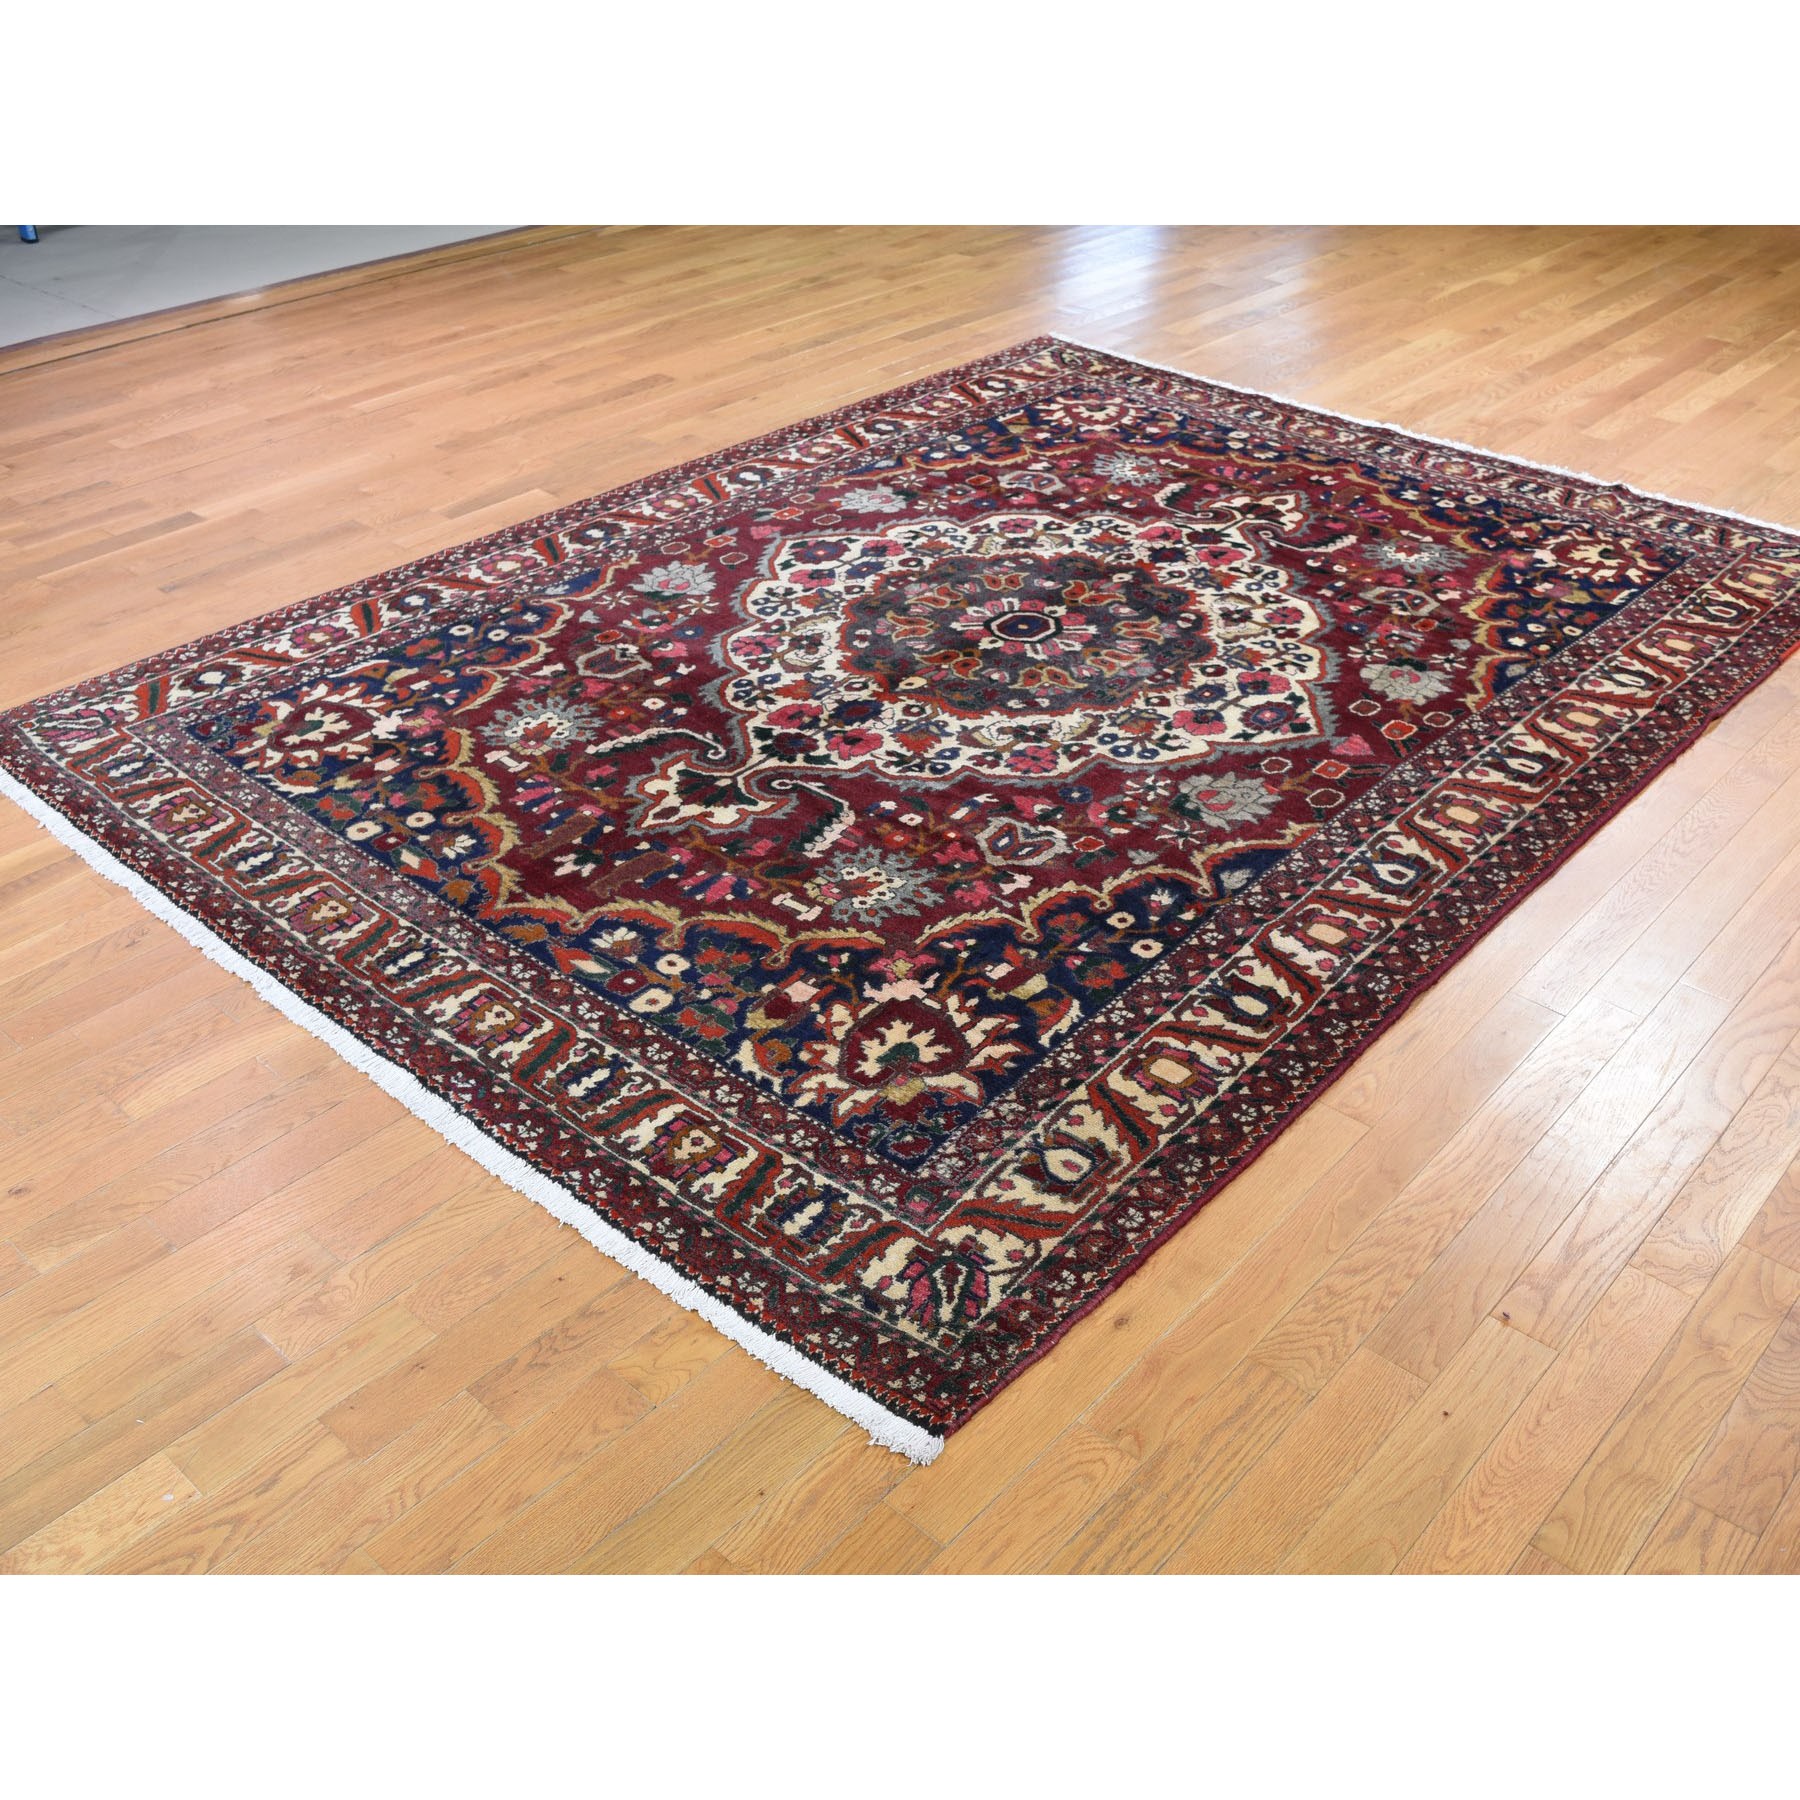 7-5 x9-10  Red Vintage Persian Bakhtiari Exc Condition Pure Wool Hand Knotted Oriental Rug 